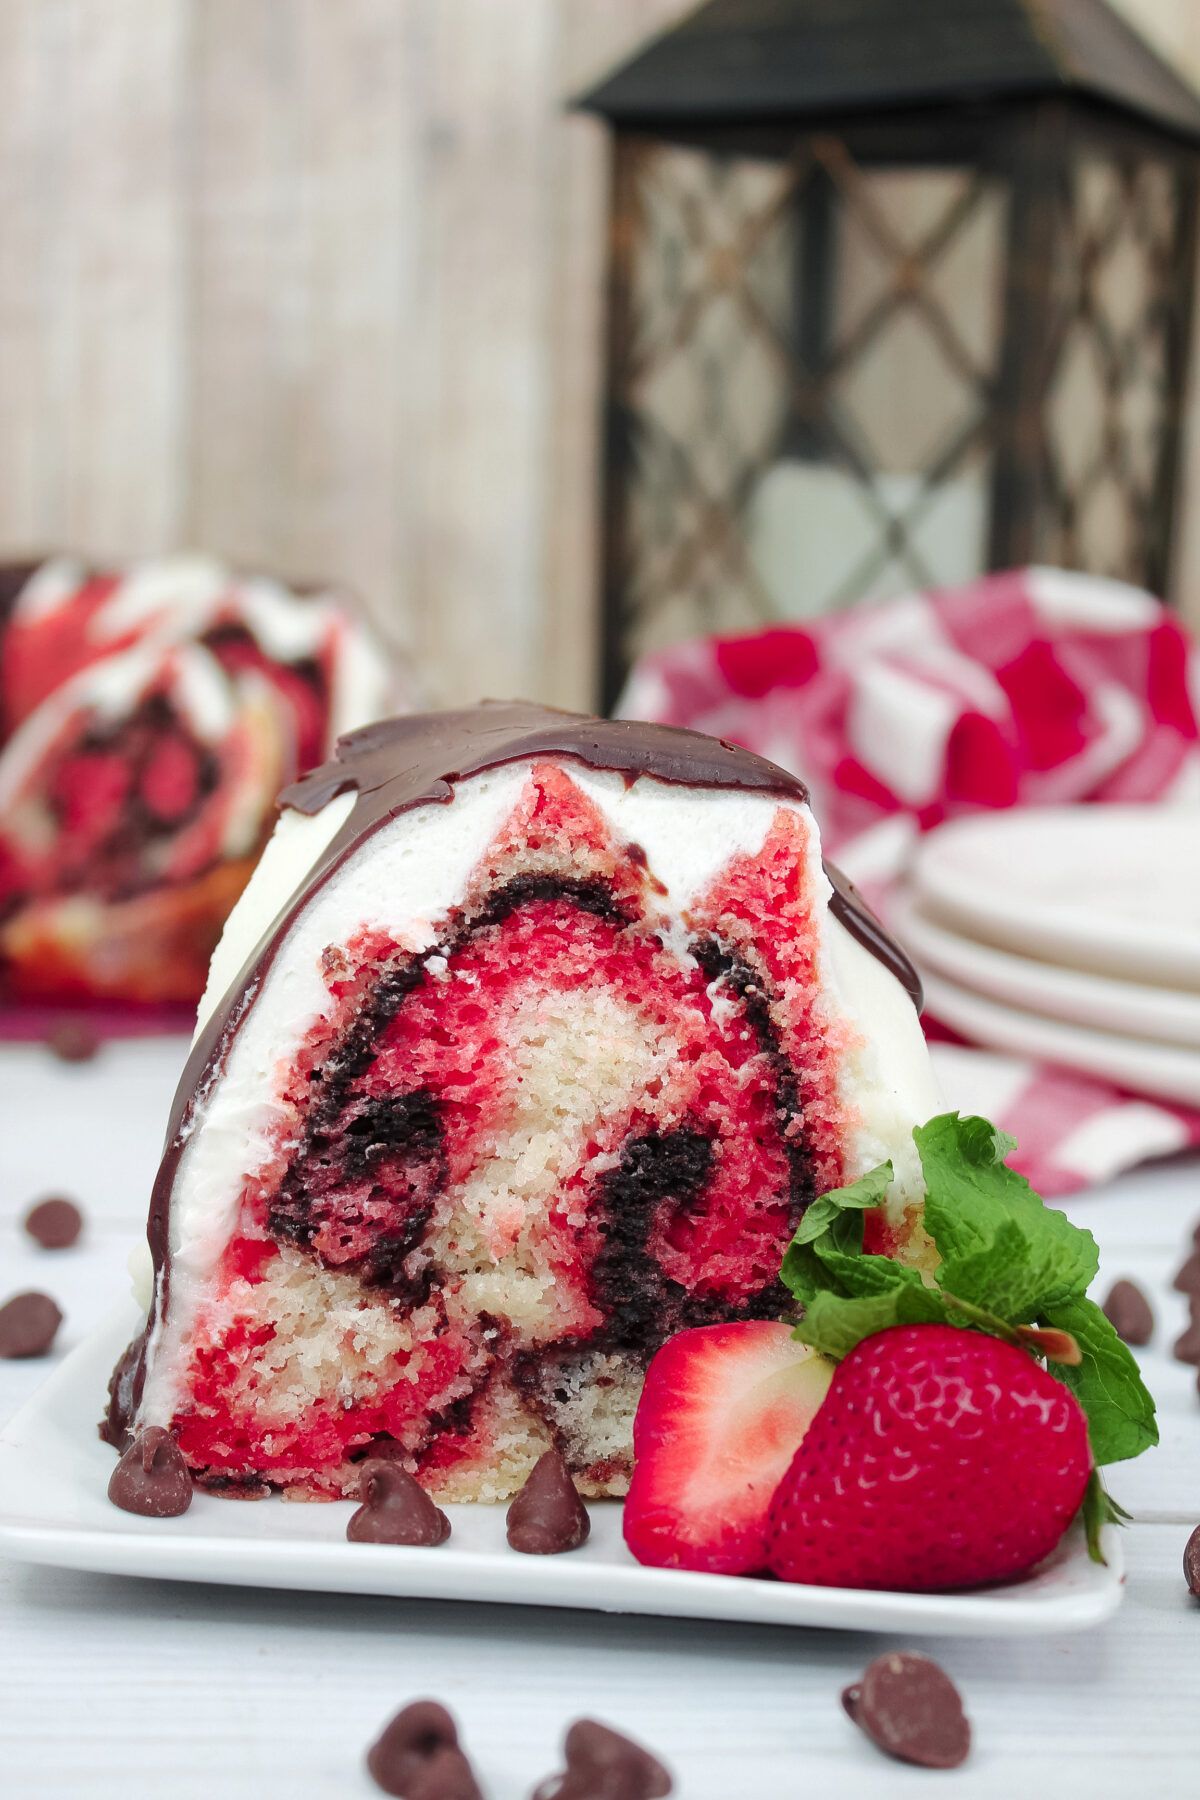 Bake this delicious and easy-to-make Neapolitan Bundt cake with a vanilla glaze, all topped off with chocolate ganache for extra decadence.